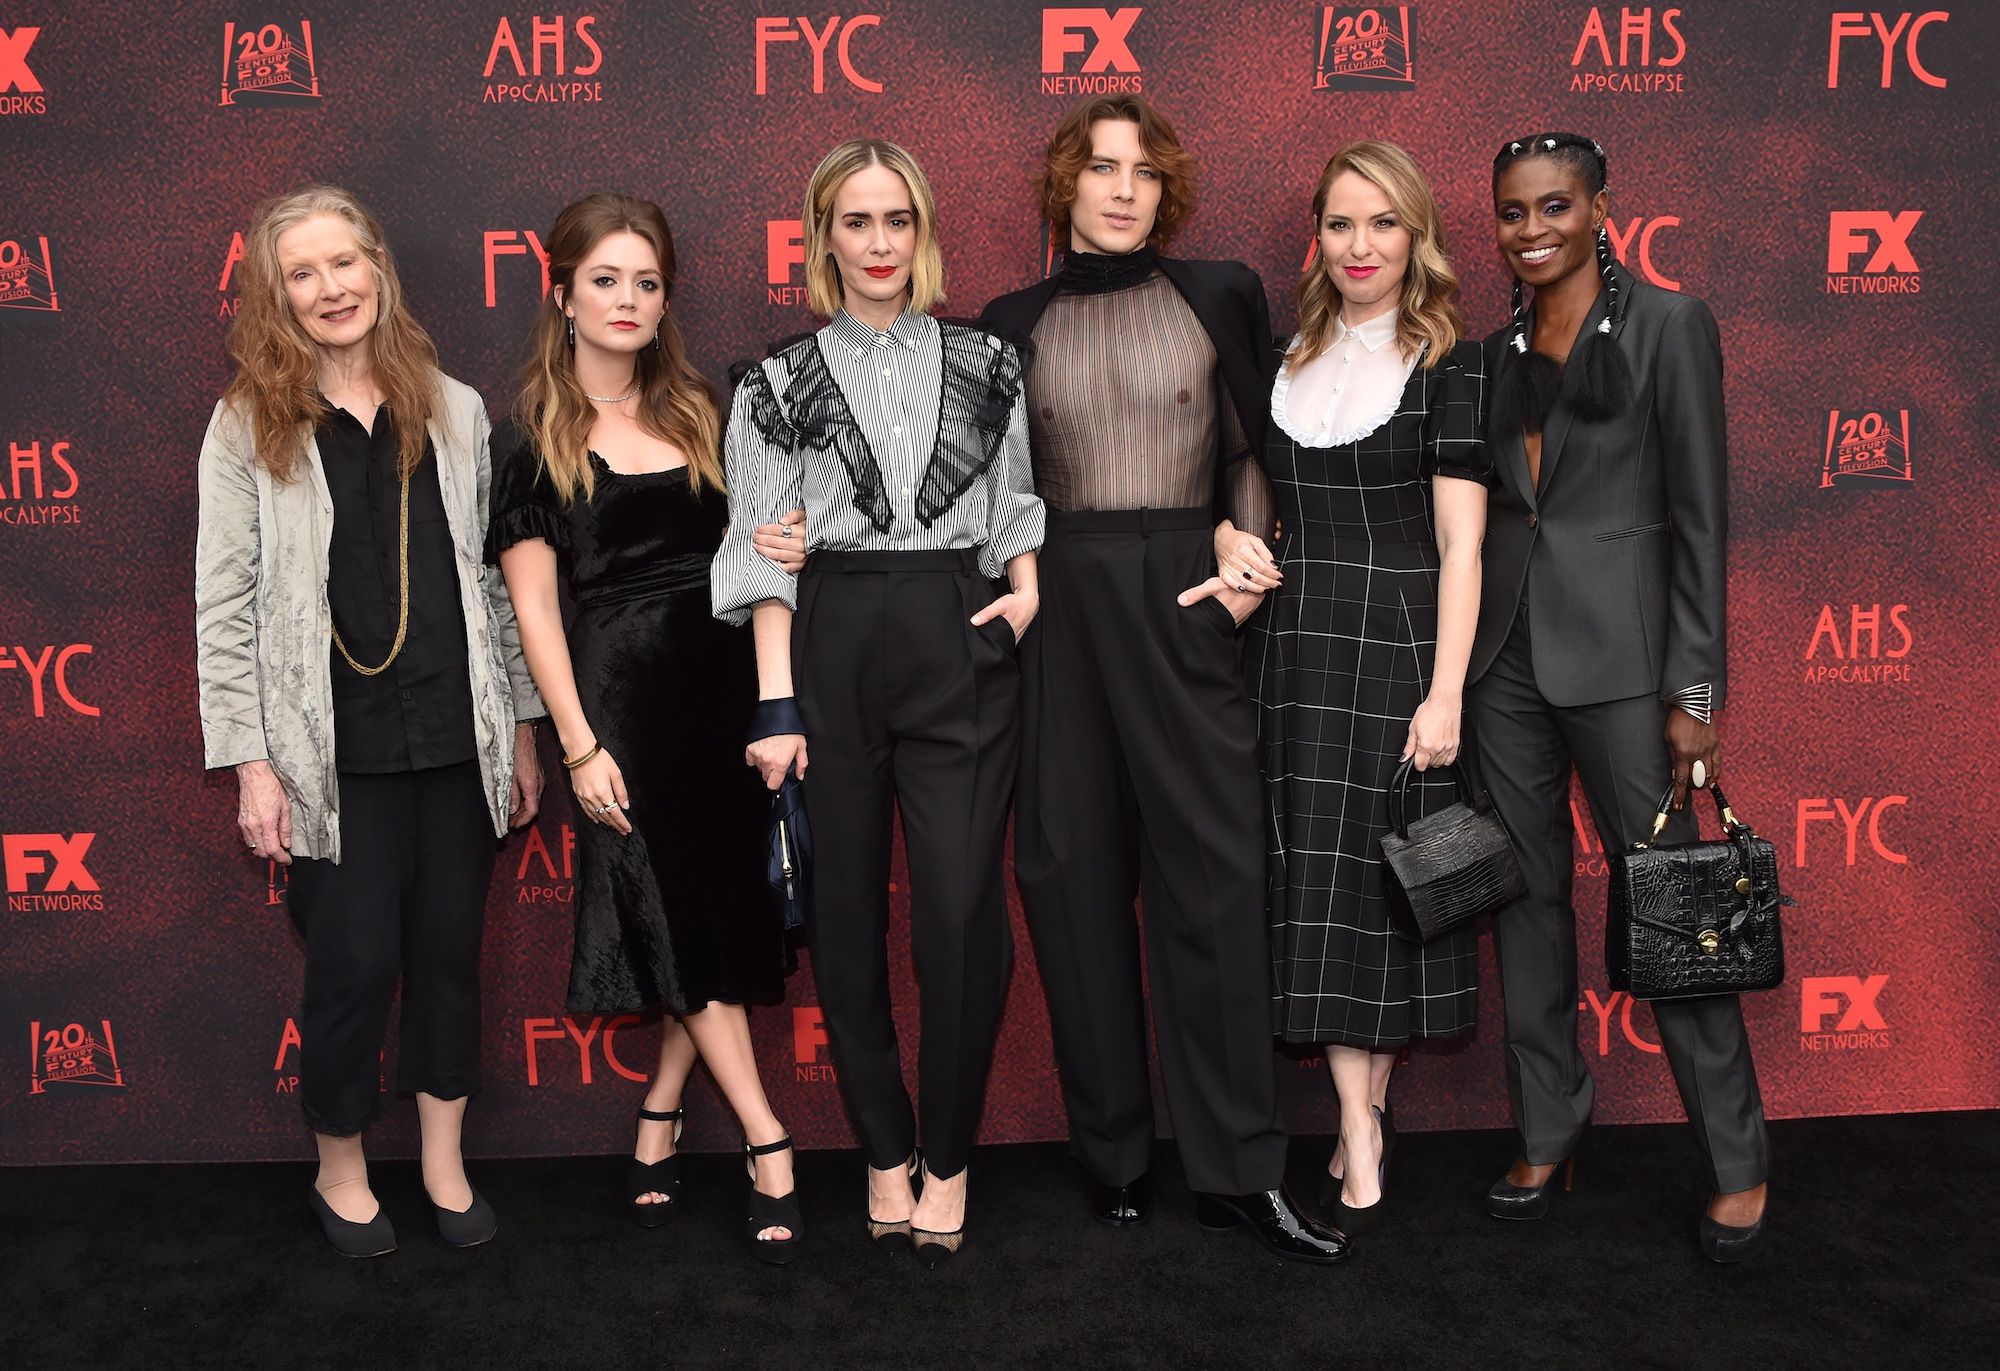 (From L-R) Actors Frances Conroy, Billie Lourd, Sarah Paulson, Cody Fern, Leslie Grossman and Adina Porter in front of a background with a repeating 'American Horror Story' logo